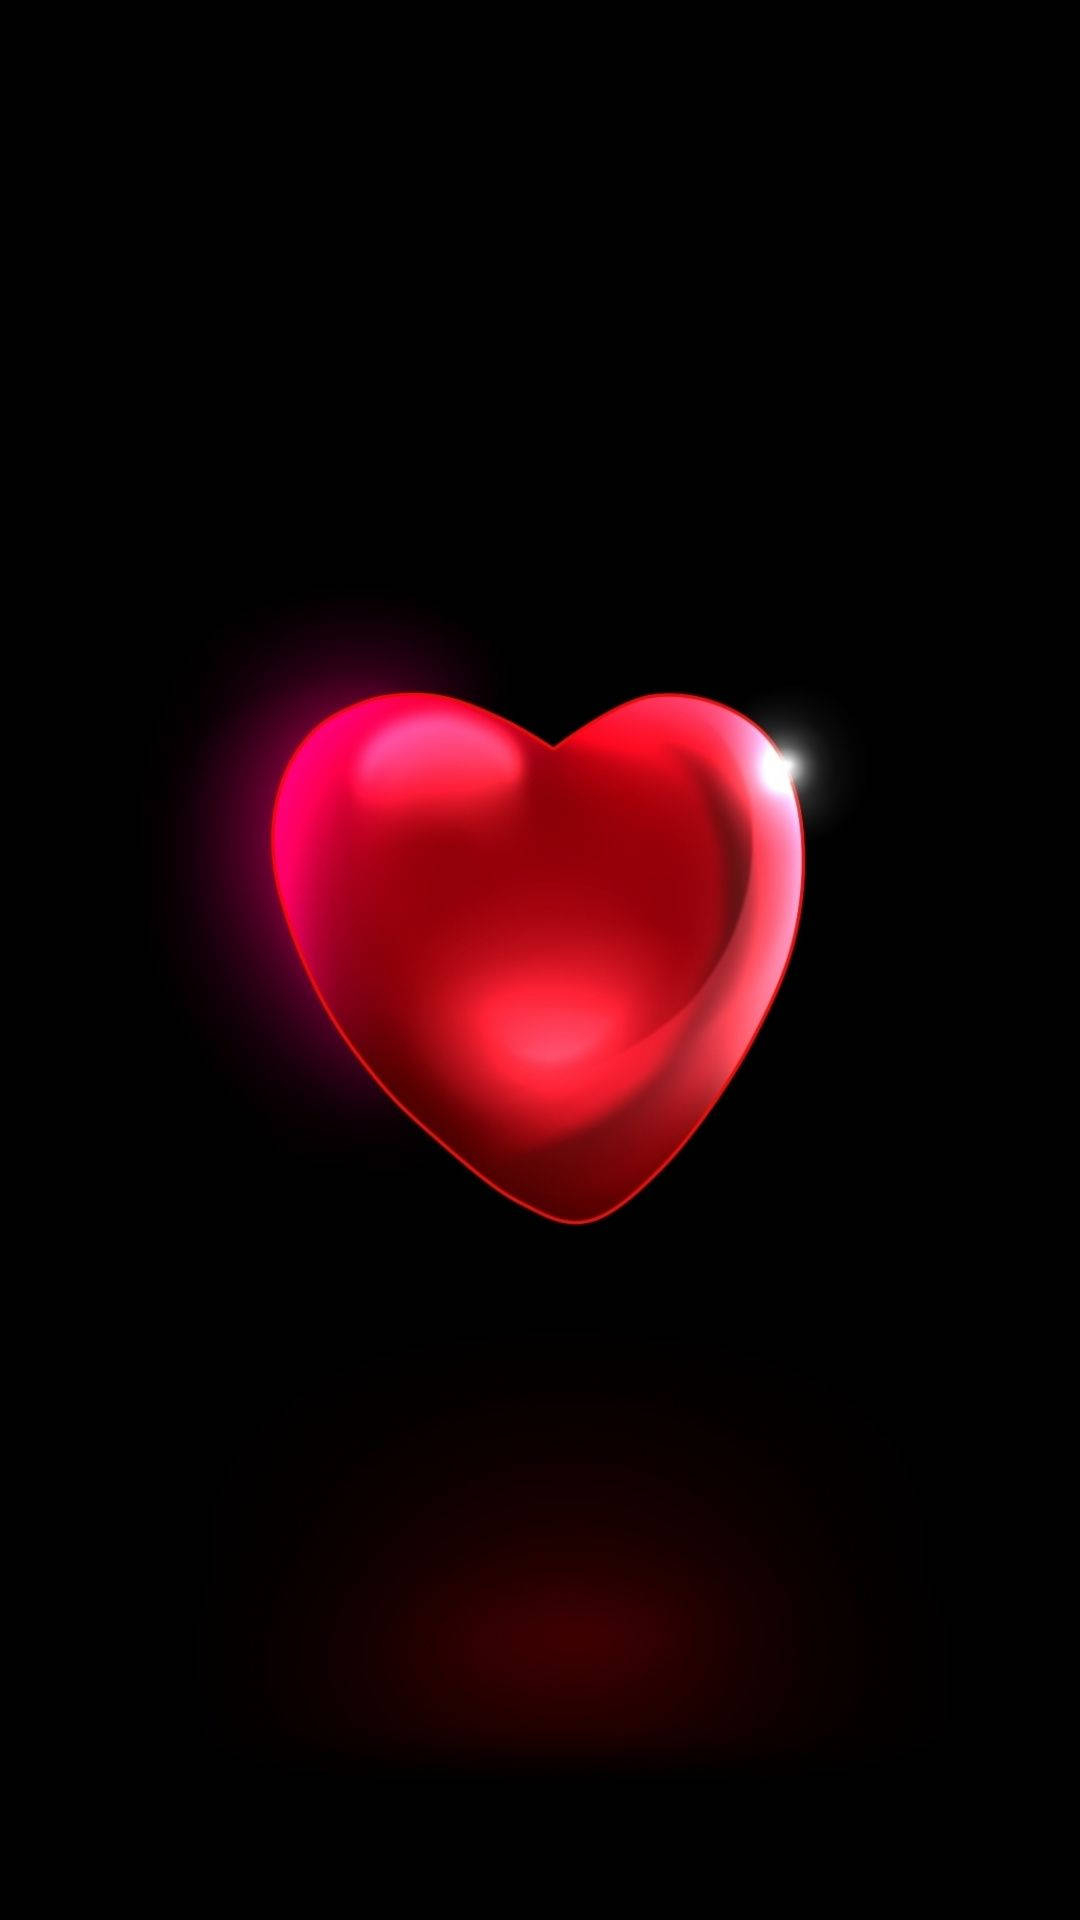 1080x1920 Download Shiny Red Heart Aesthetic Wallpaper